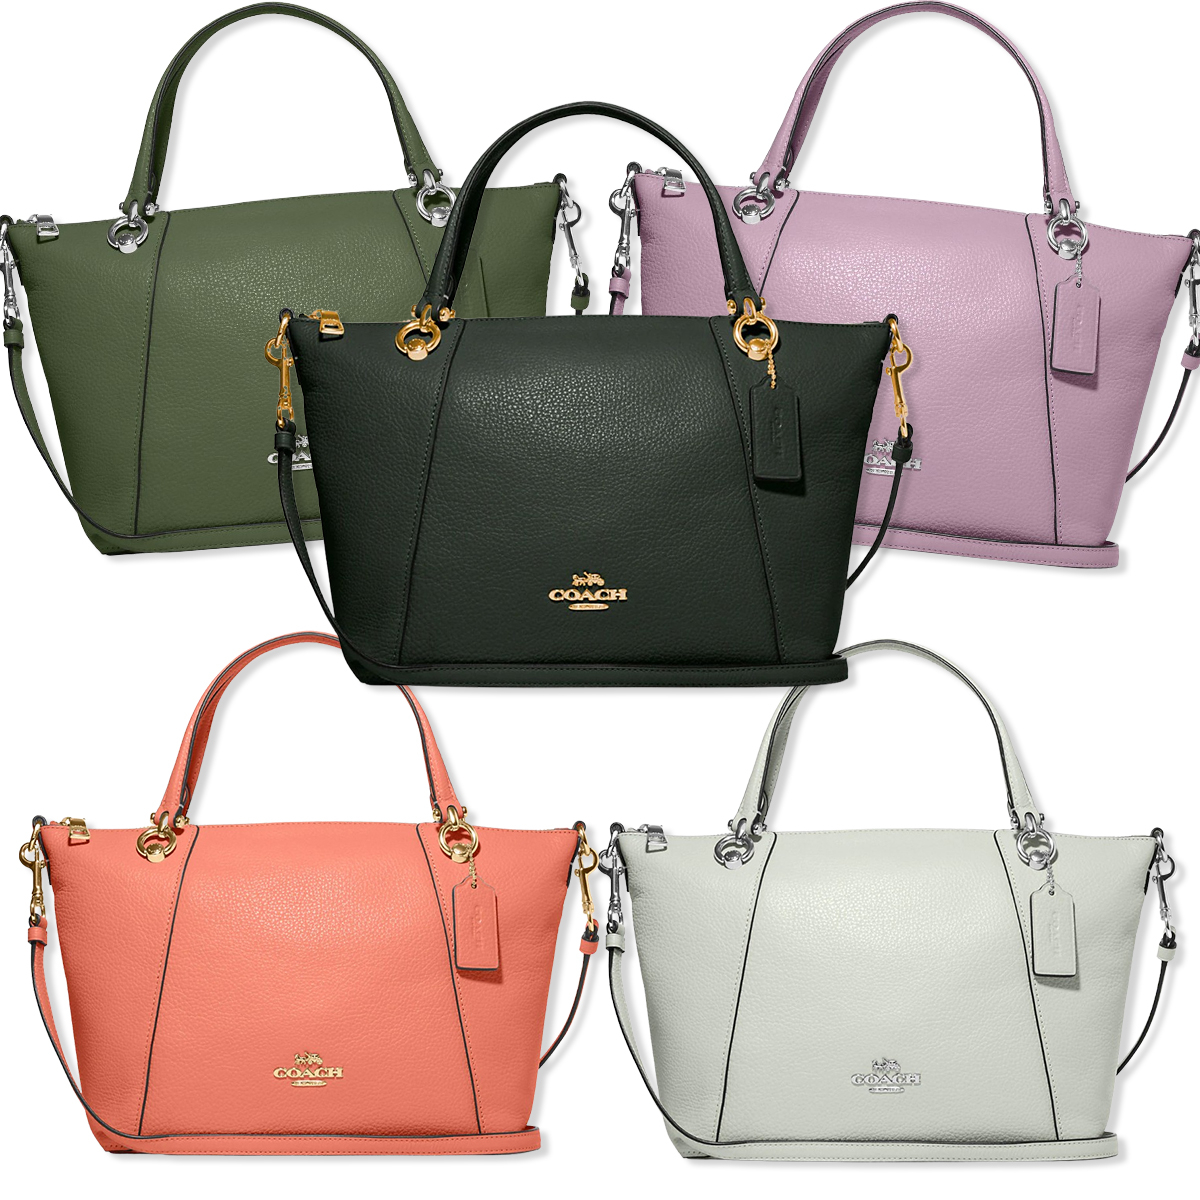 Today Only, You Can Score This Bestselling $378 Coach Bag for $95 – E! Online